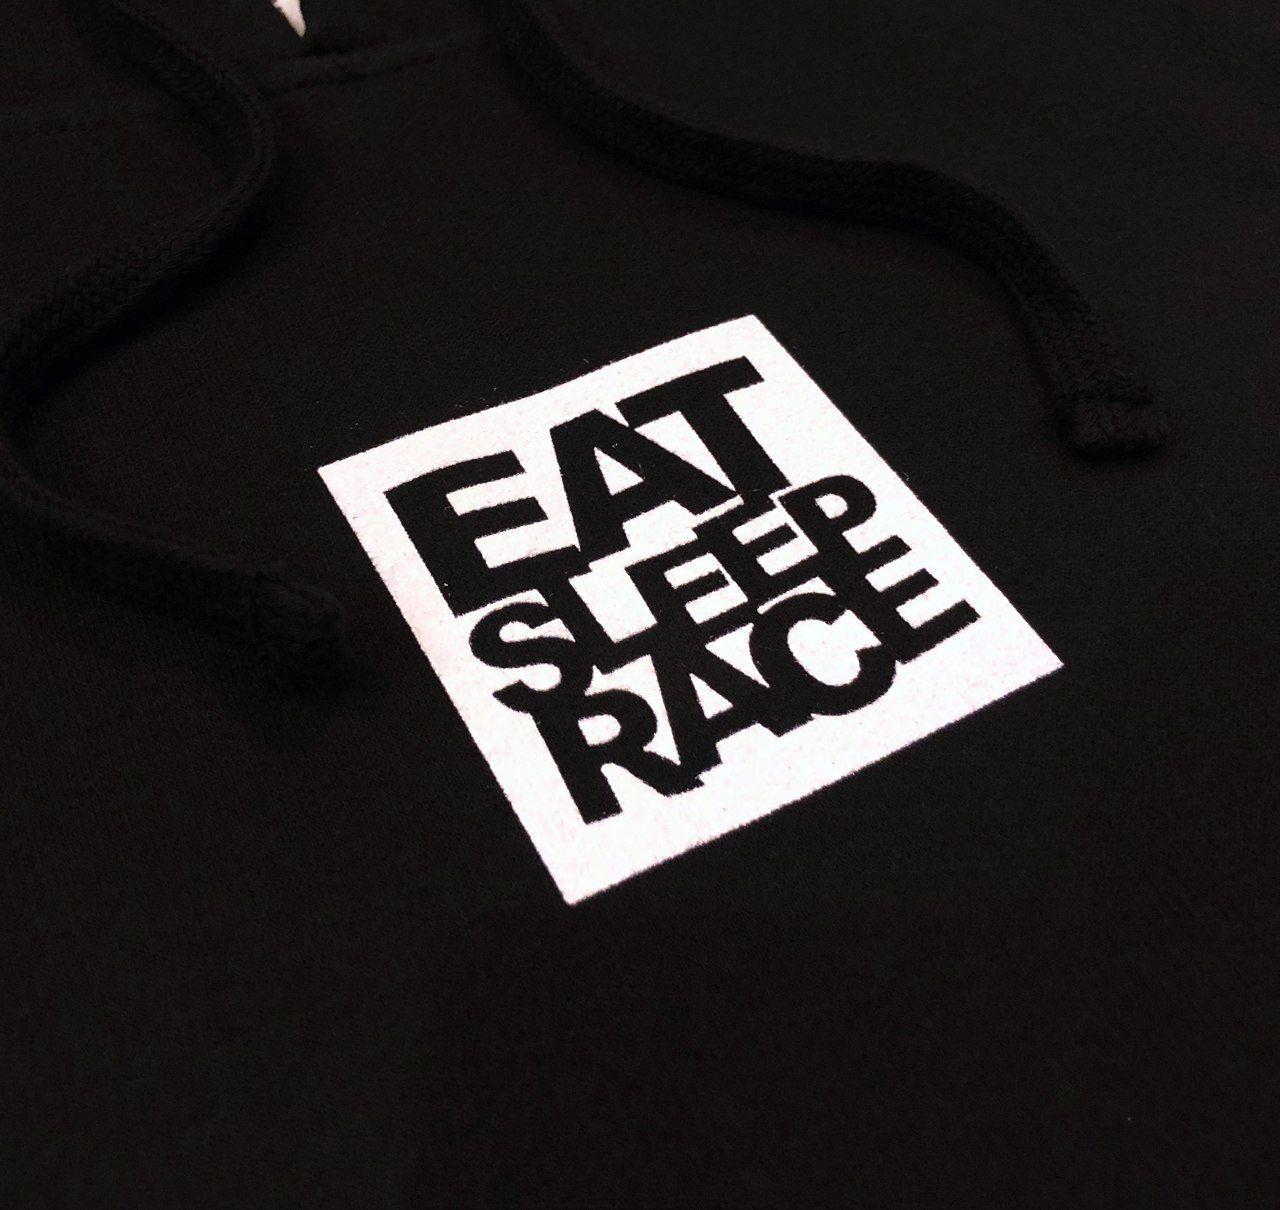 Black and White Clothing and Apparel Logo - Pull Over Logo Square Hoodie. Black White Sleep Race